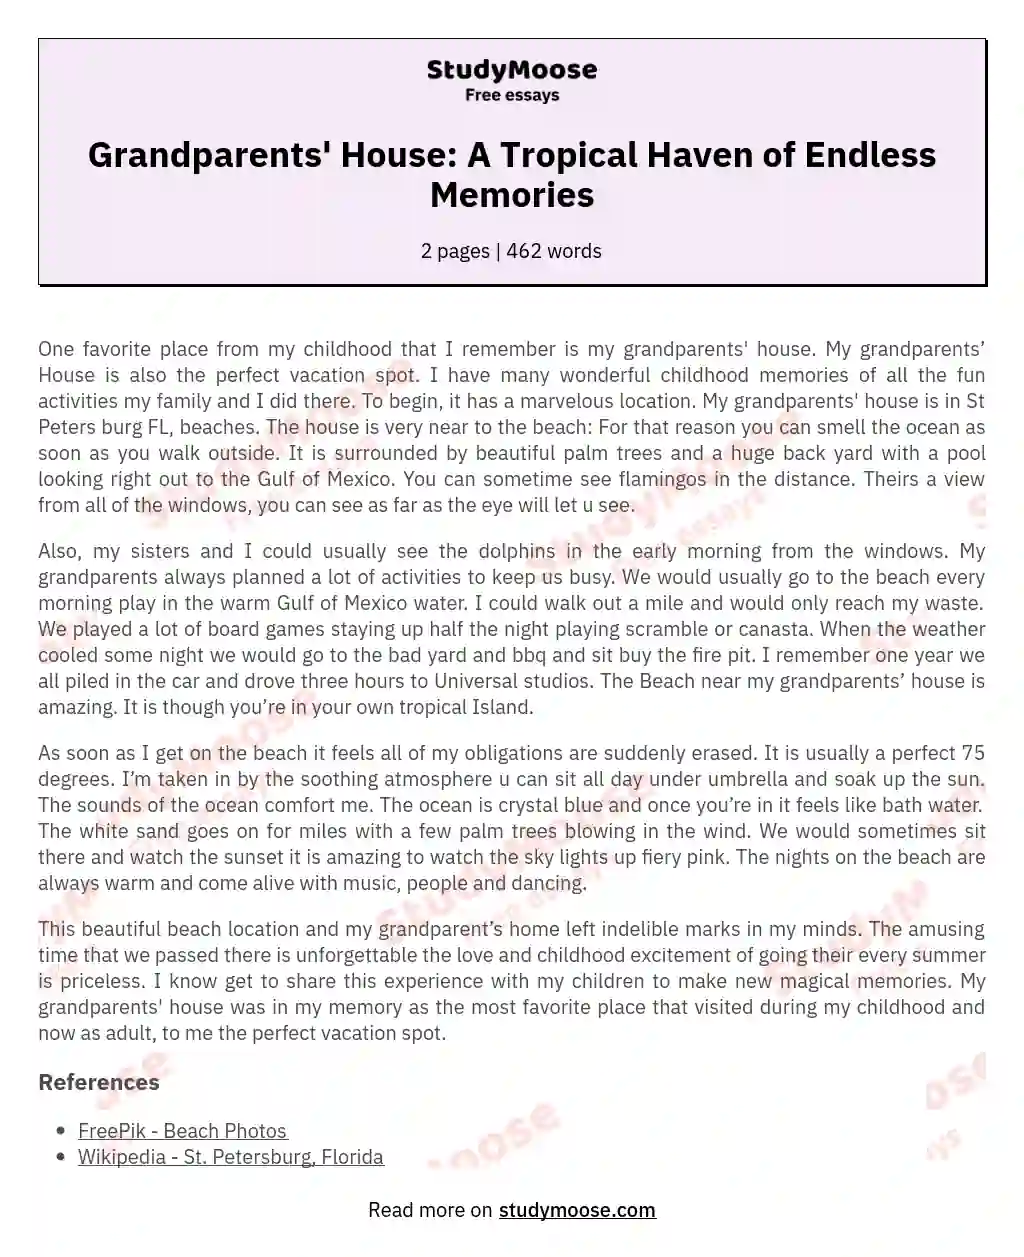 Grandparents' House: A Tropical Haven of Endless Memories essay